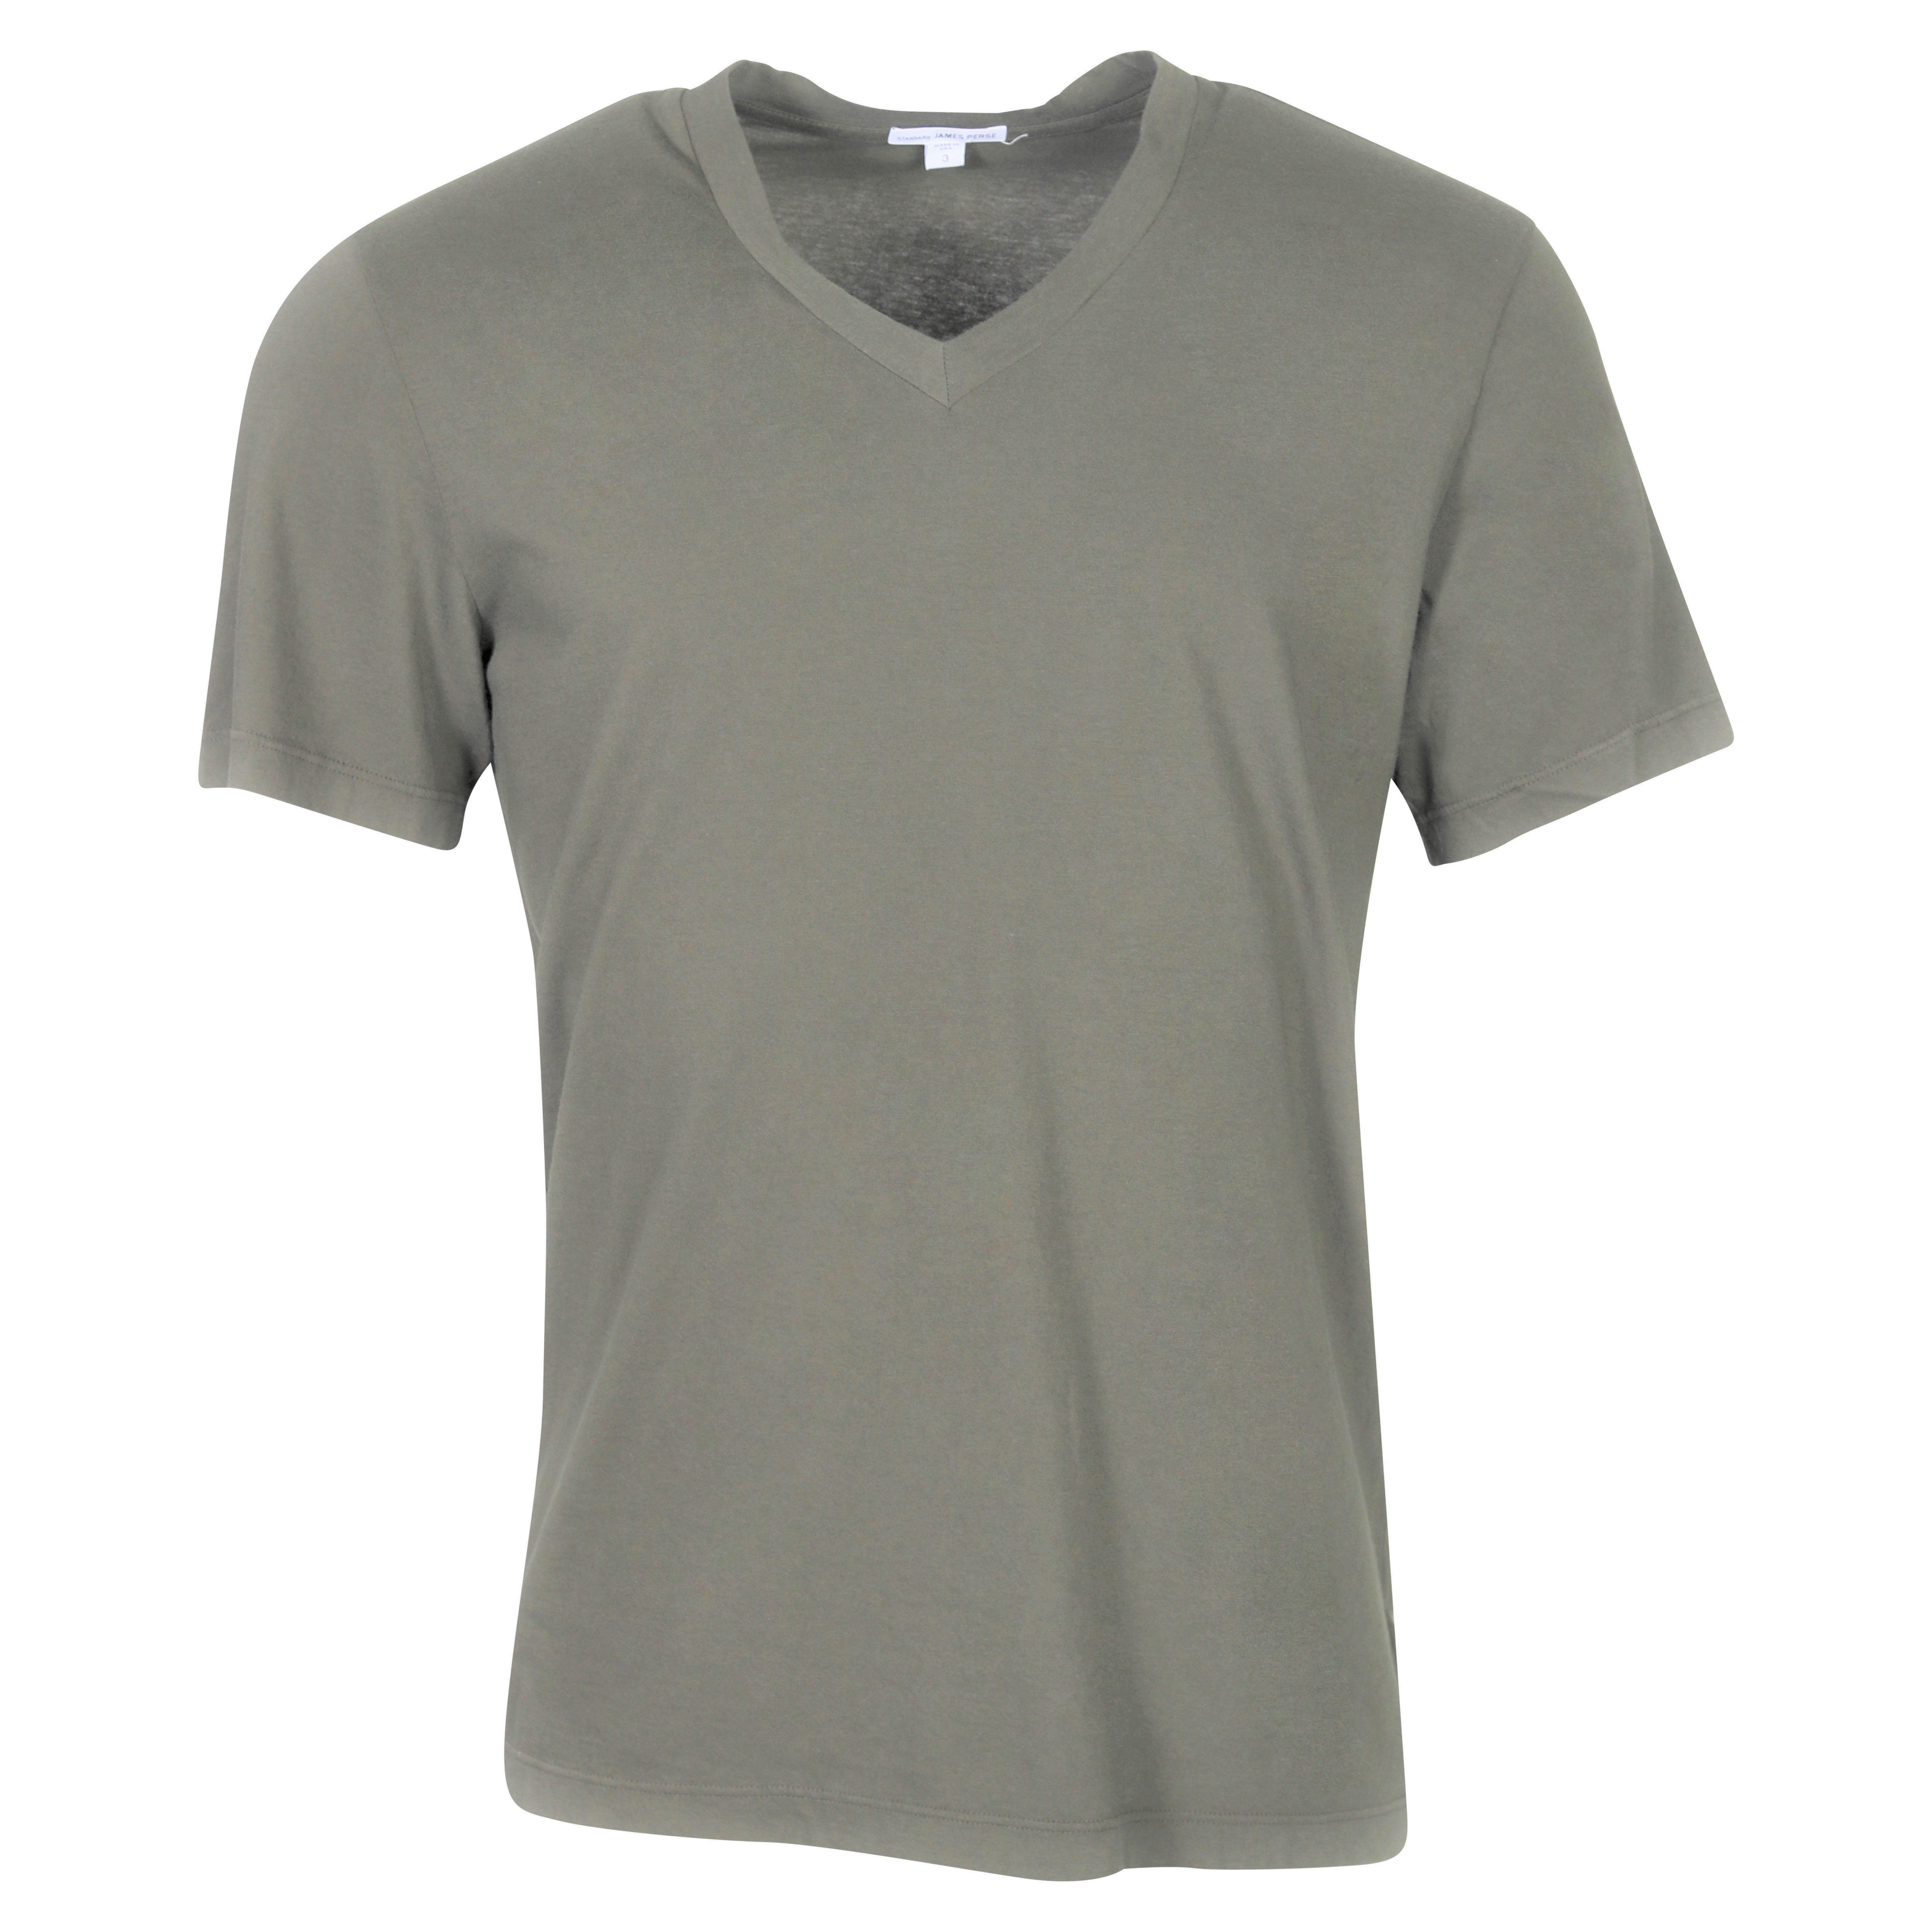 James Perse T-Shirt V-Neck in Jungle 2XL